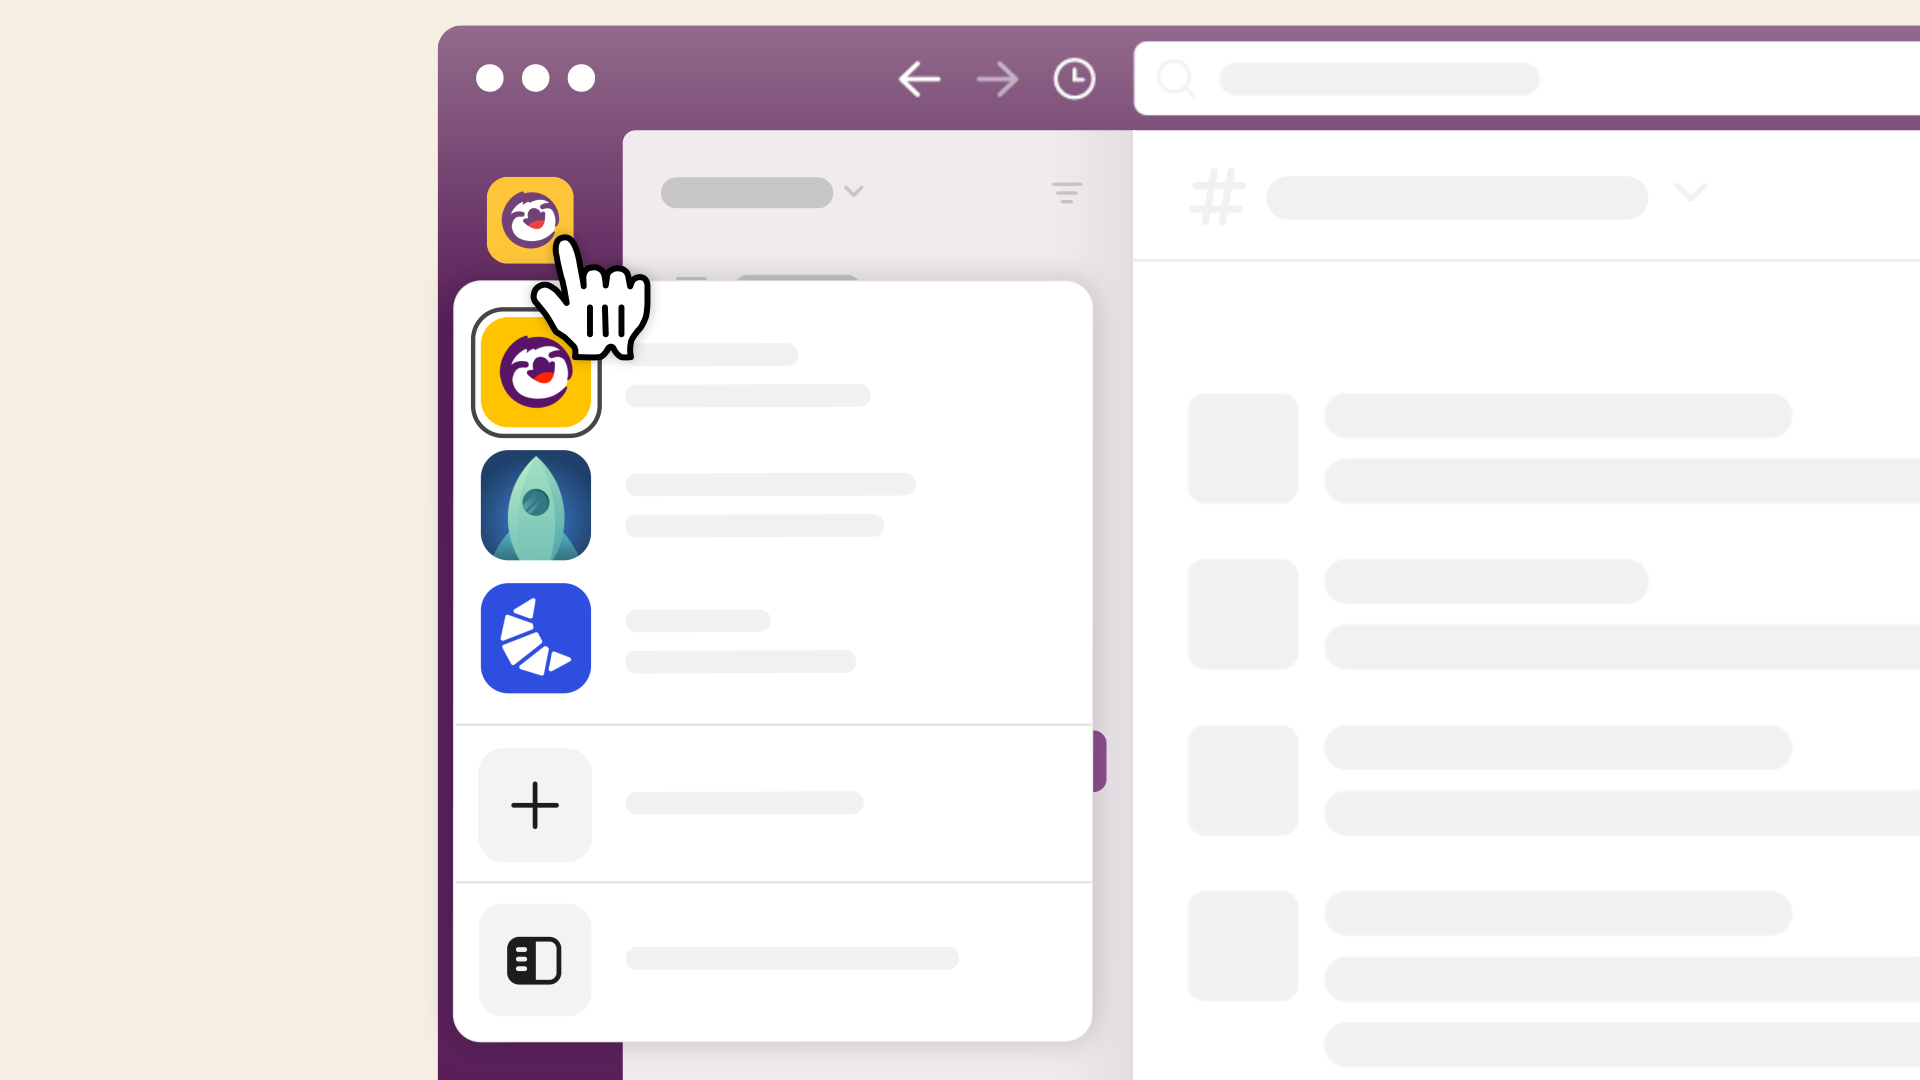 A static image of a cusor hovering over the workspace icon in the Slack desktop app